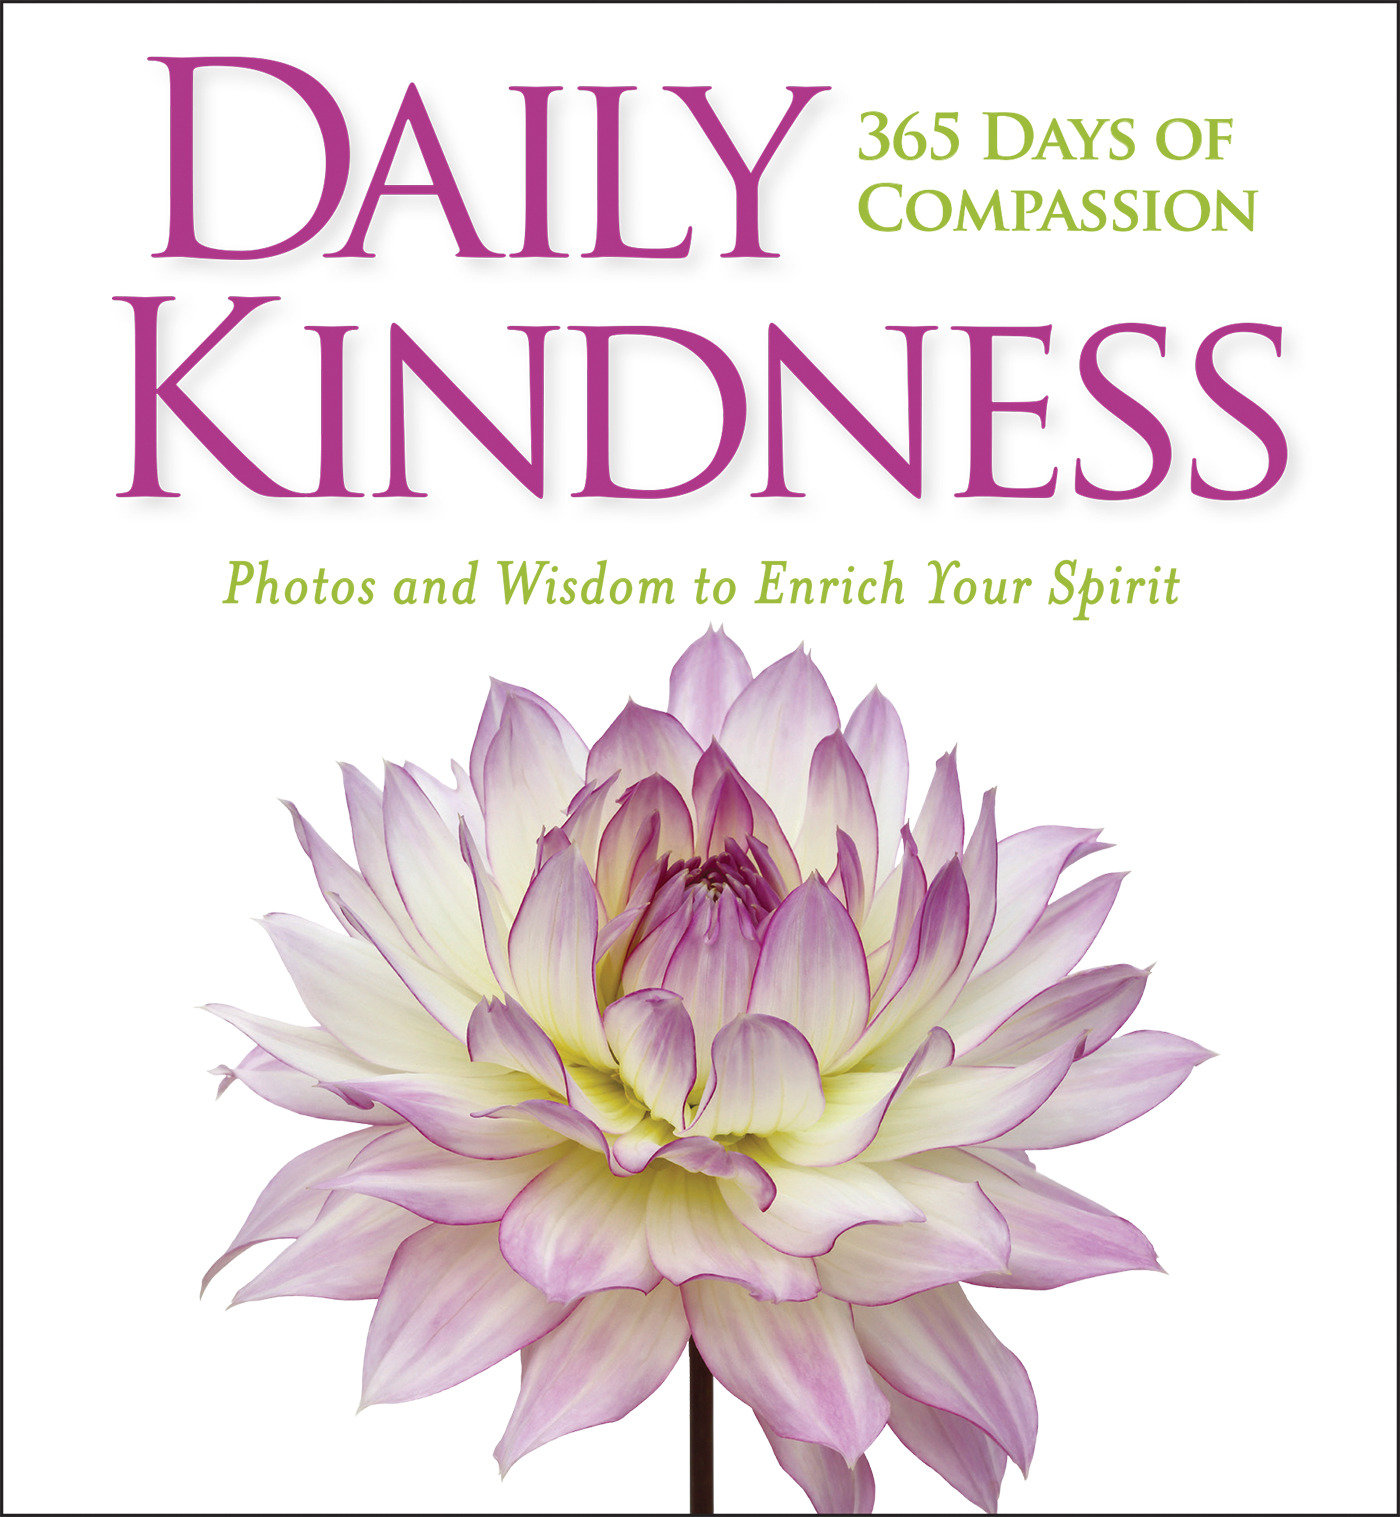 Daily Kindness (Hardcover Book)